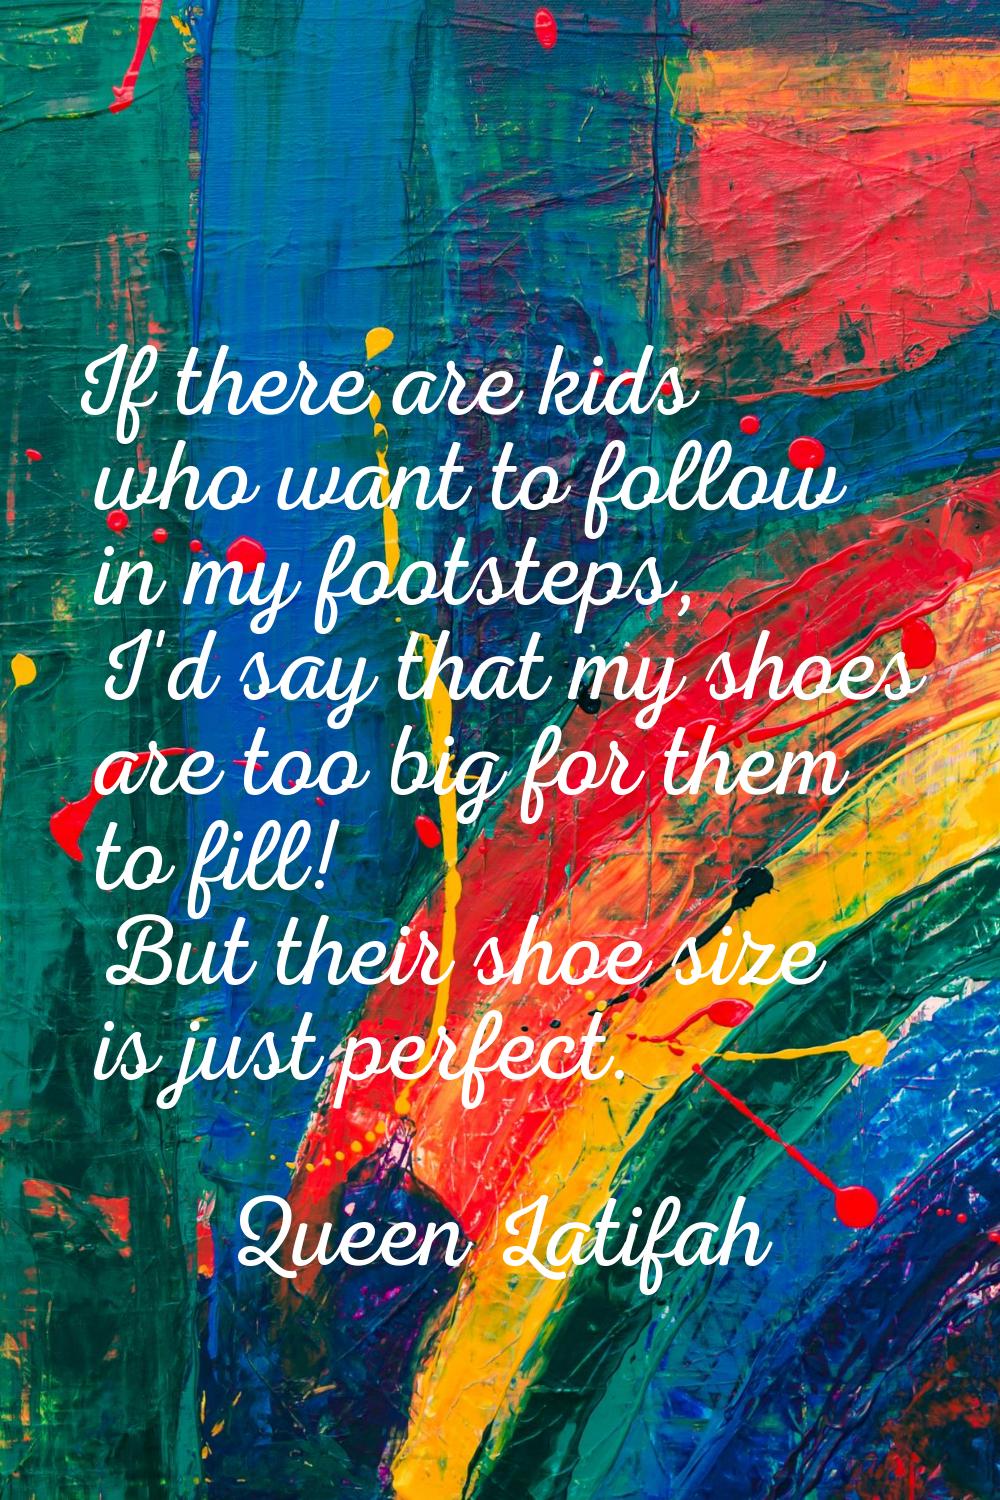 If there are kids who want to follow in my footsteps, I'd say that my shoes are too big for them to